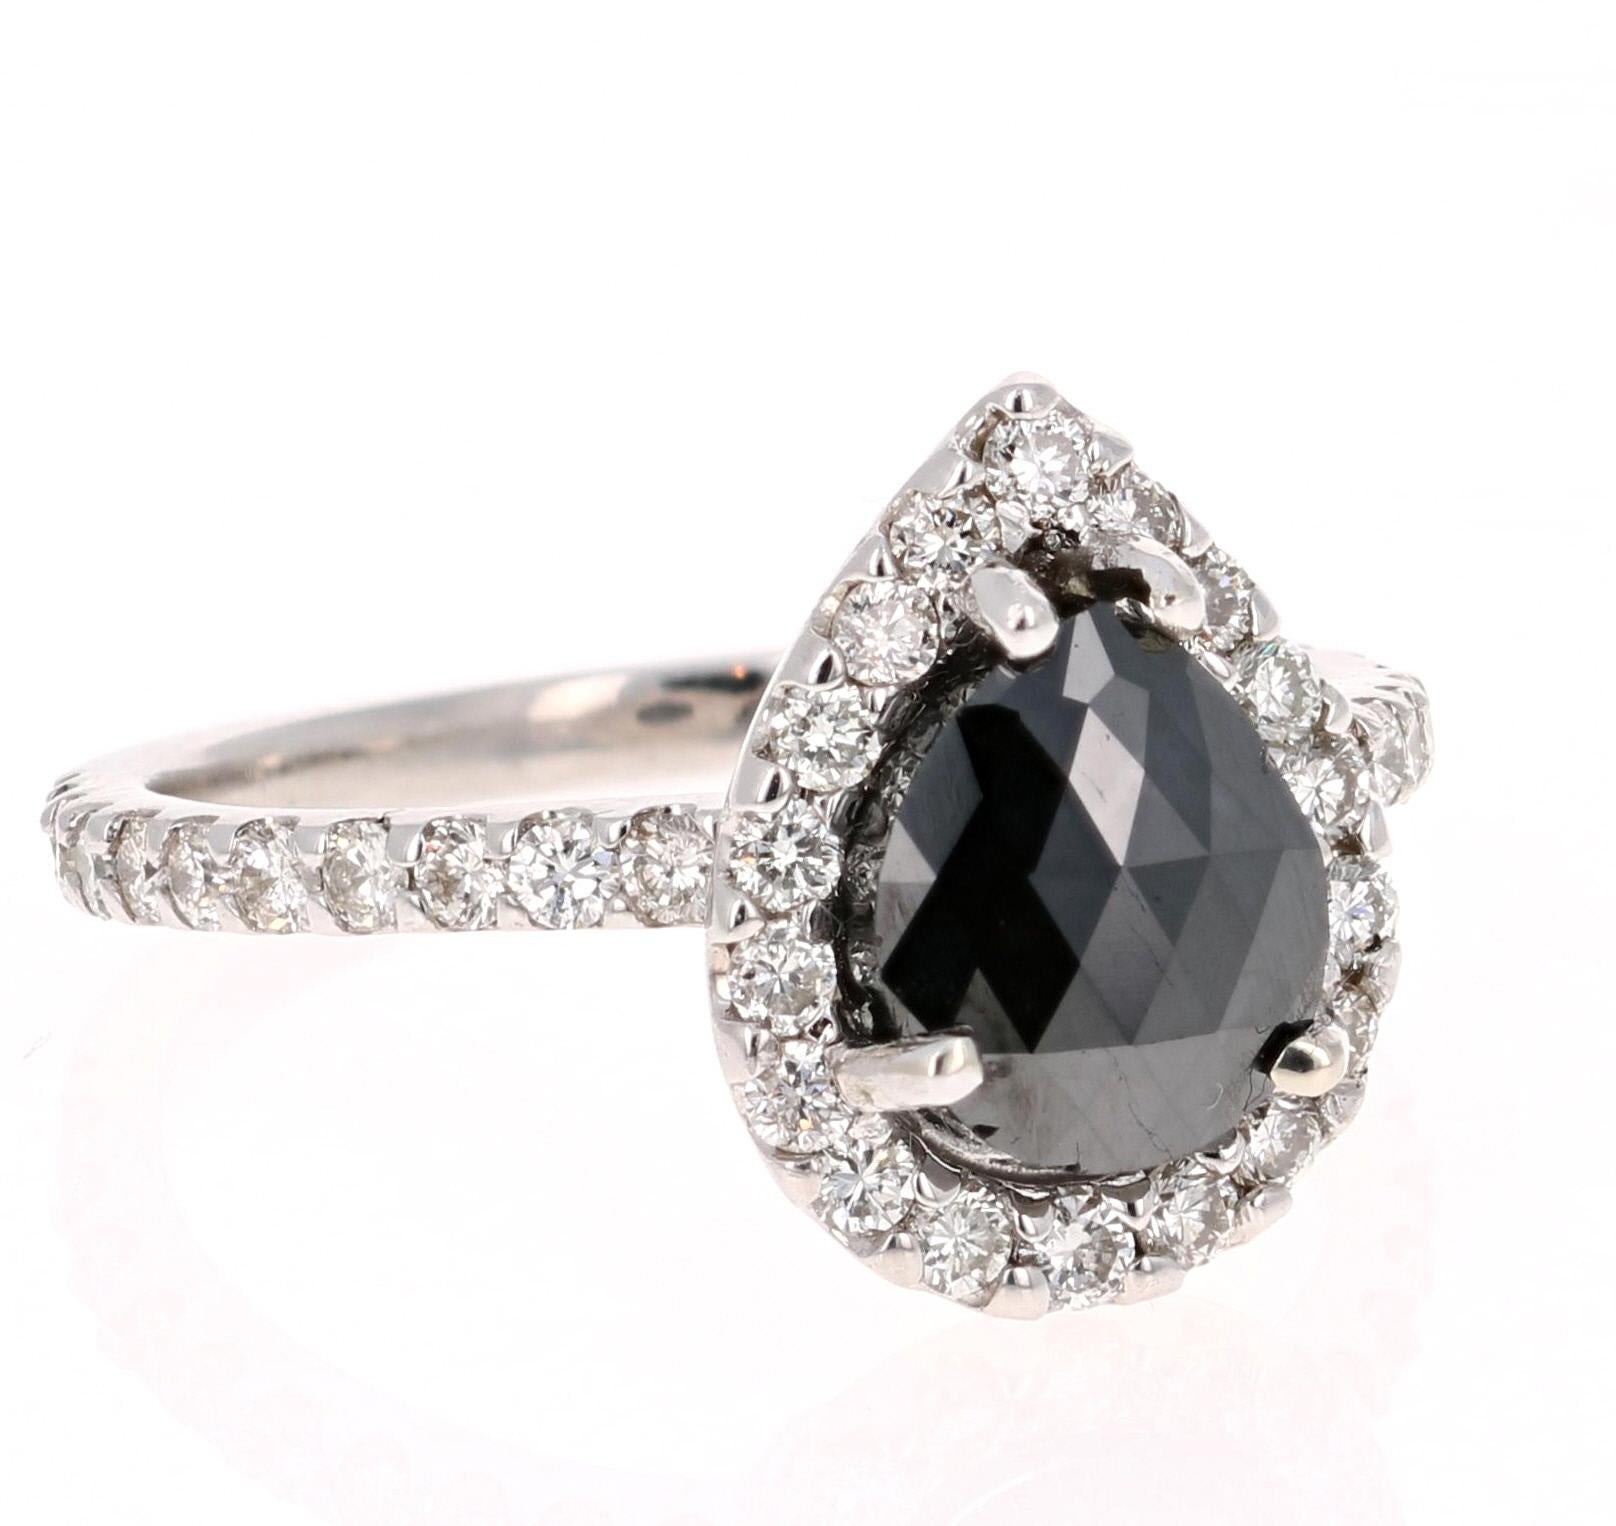 A stunner that can transcend into a unique engagement ring!! This ring is made in 14K White Gold and weighs approximately 3.5 grams. 

The Black Diamond is a Pear Cut and weighs 1.77 carats. The Black Diamond is a natural diamond that has been